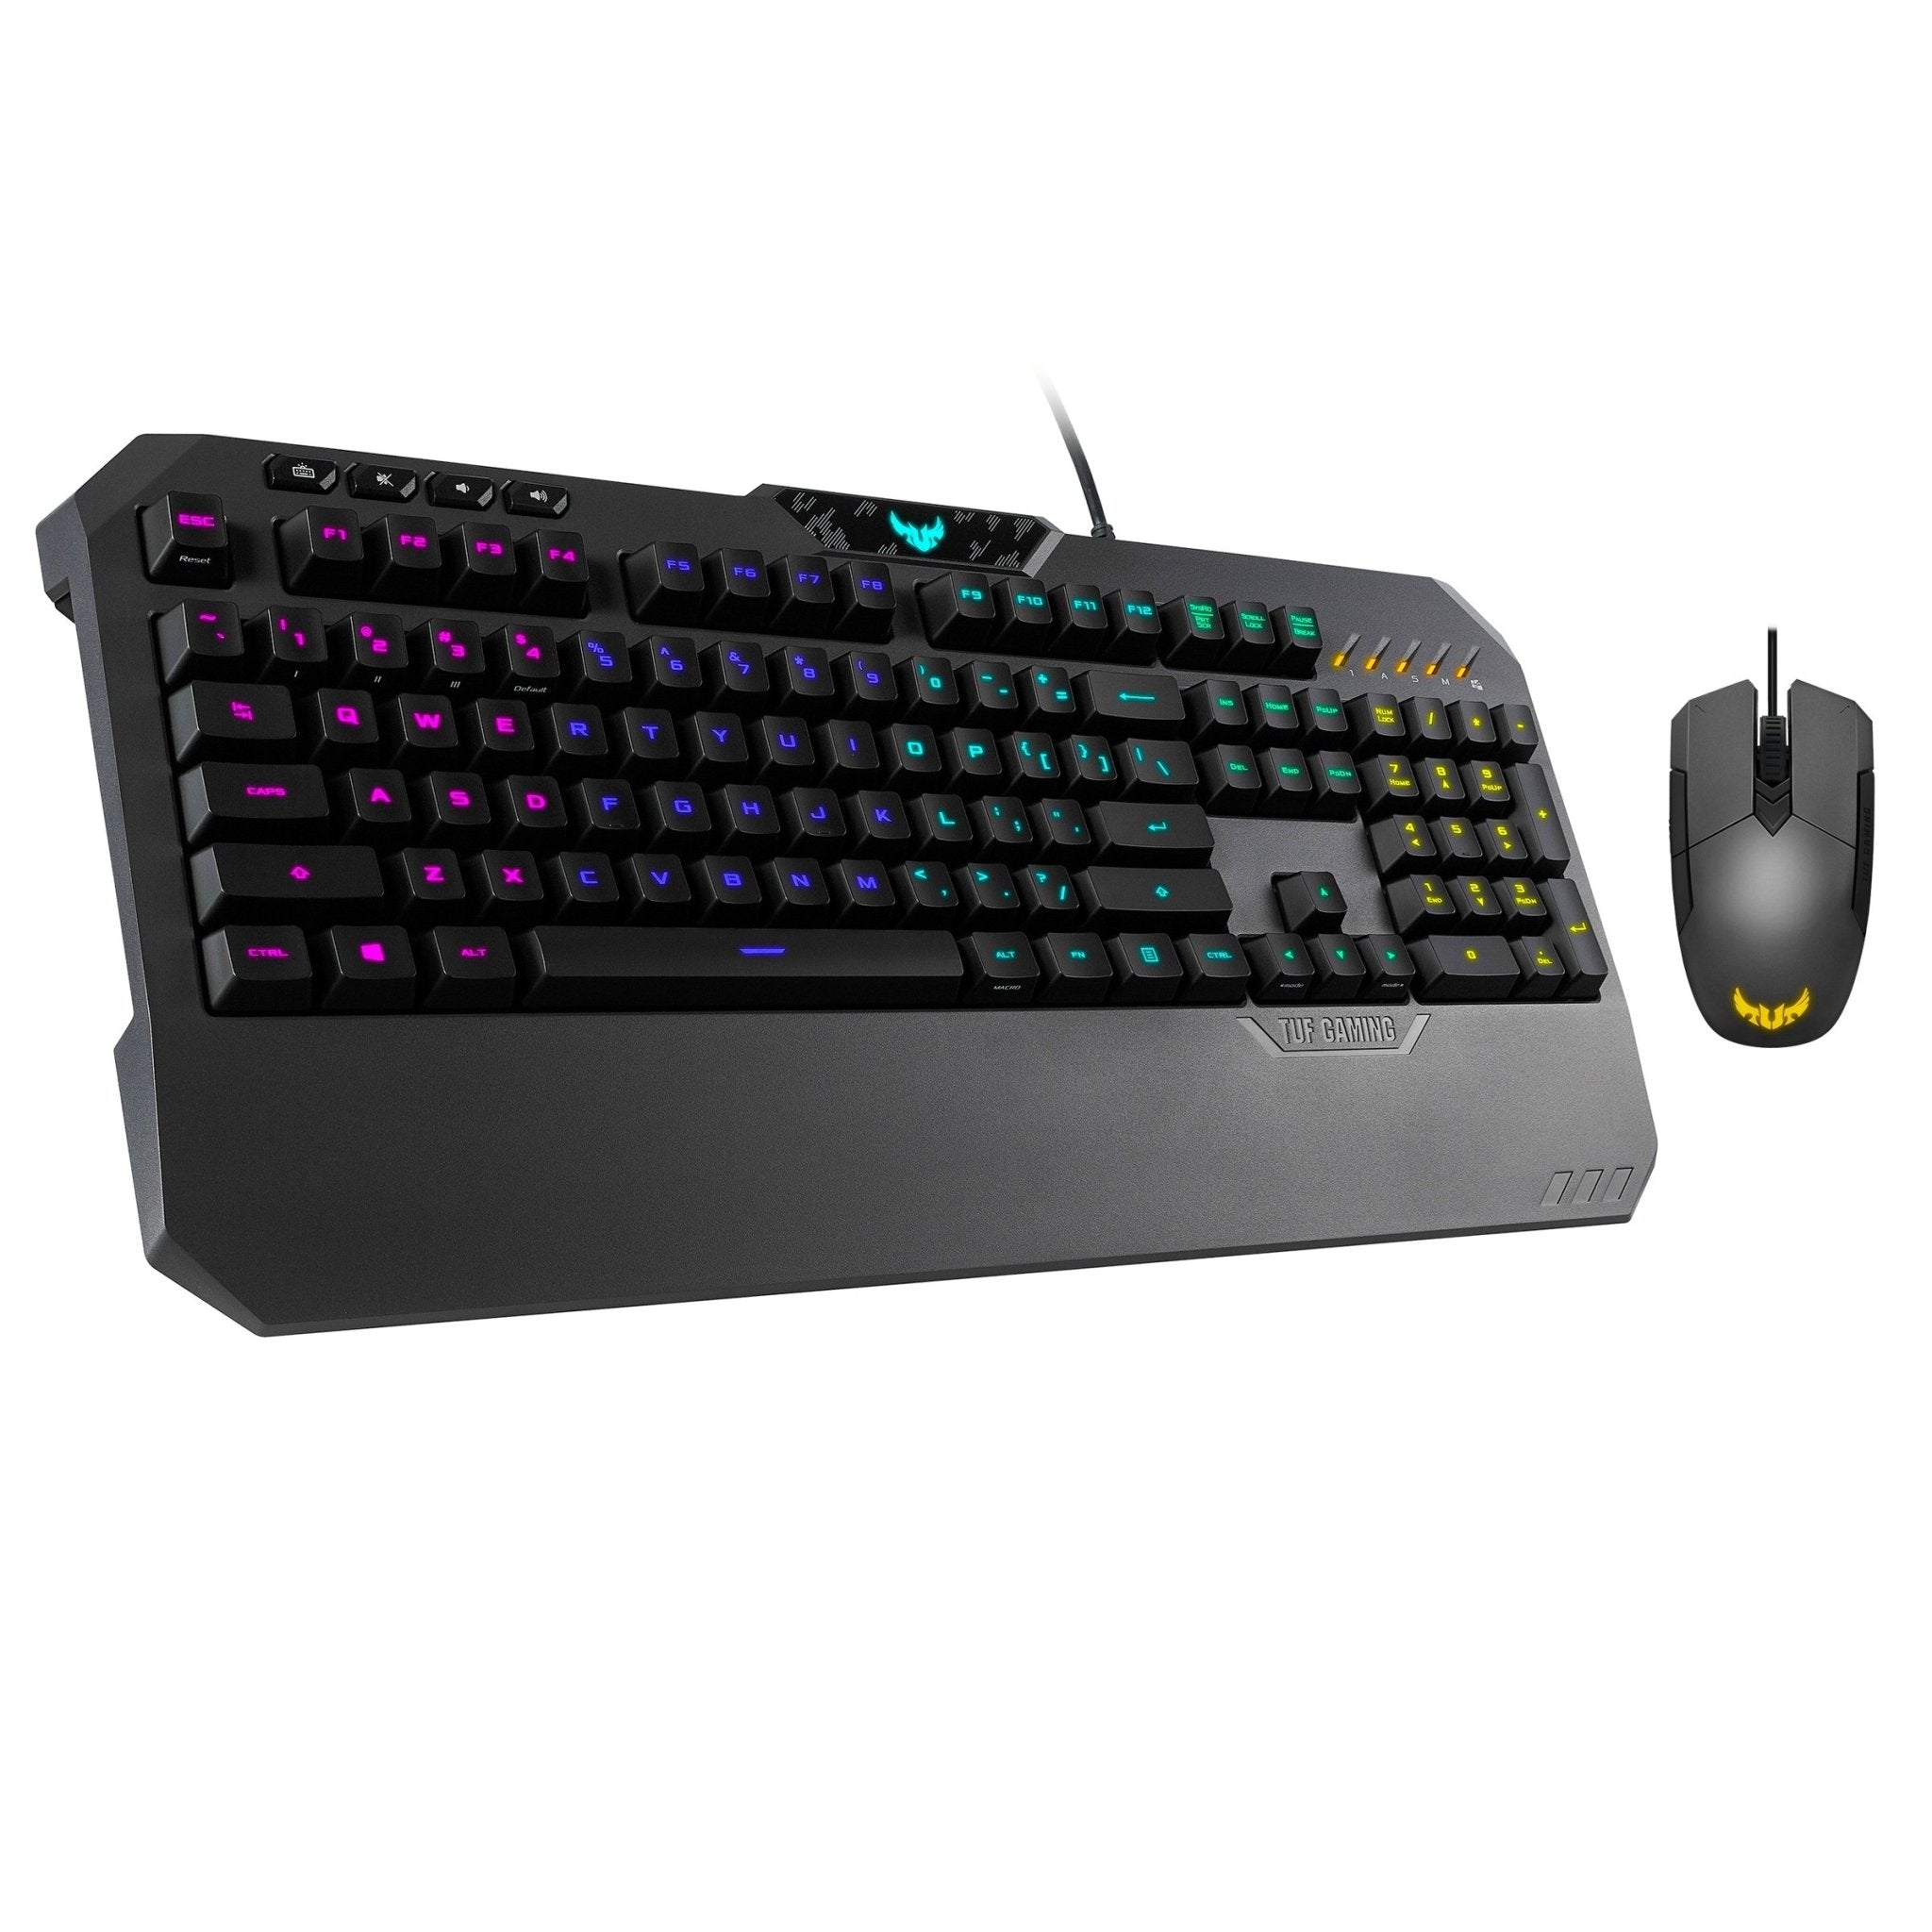 Asus Tuf Gaming K5 Keyboard And M5 Mouse Combo - Store 974 | ستور ٩٧٤